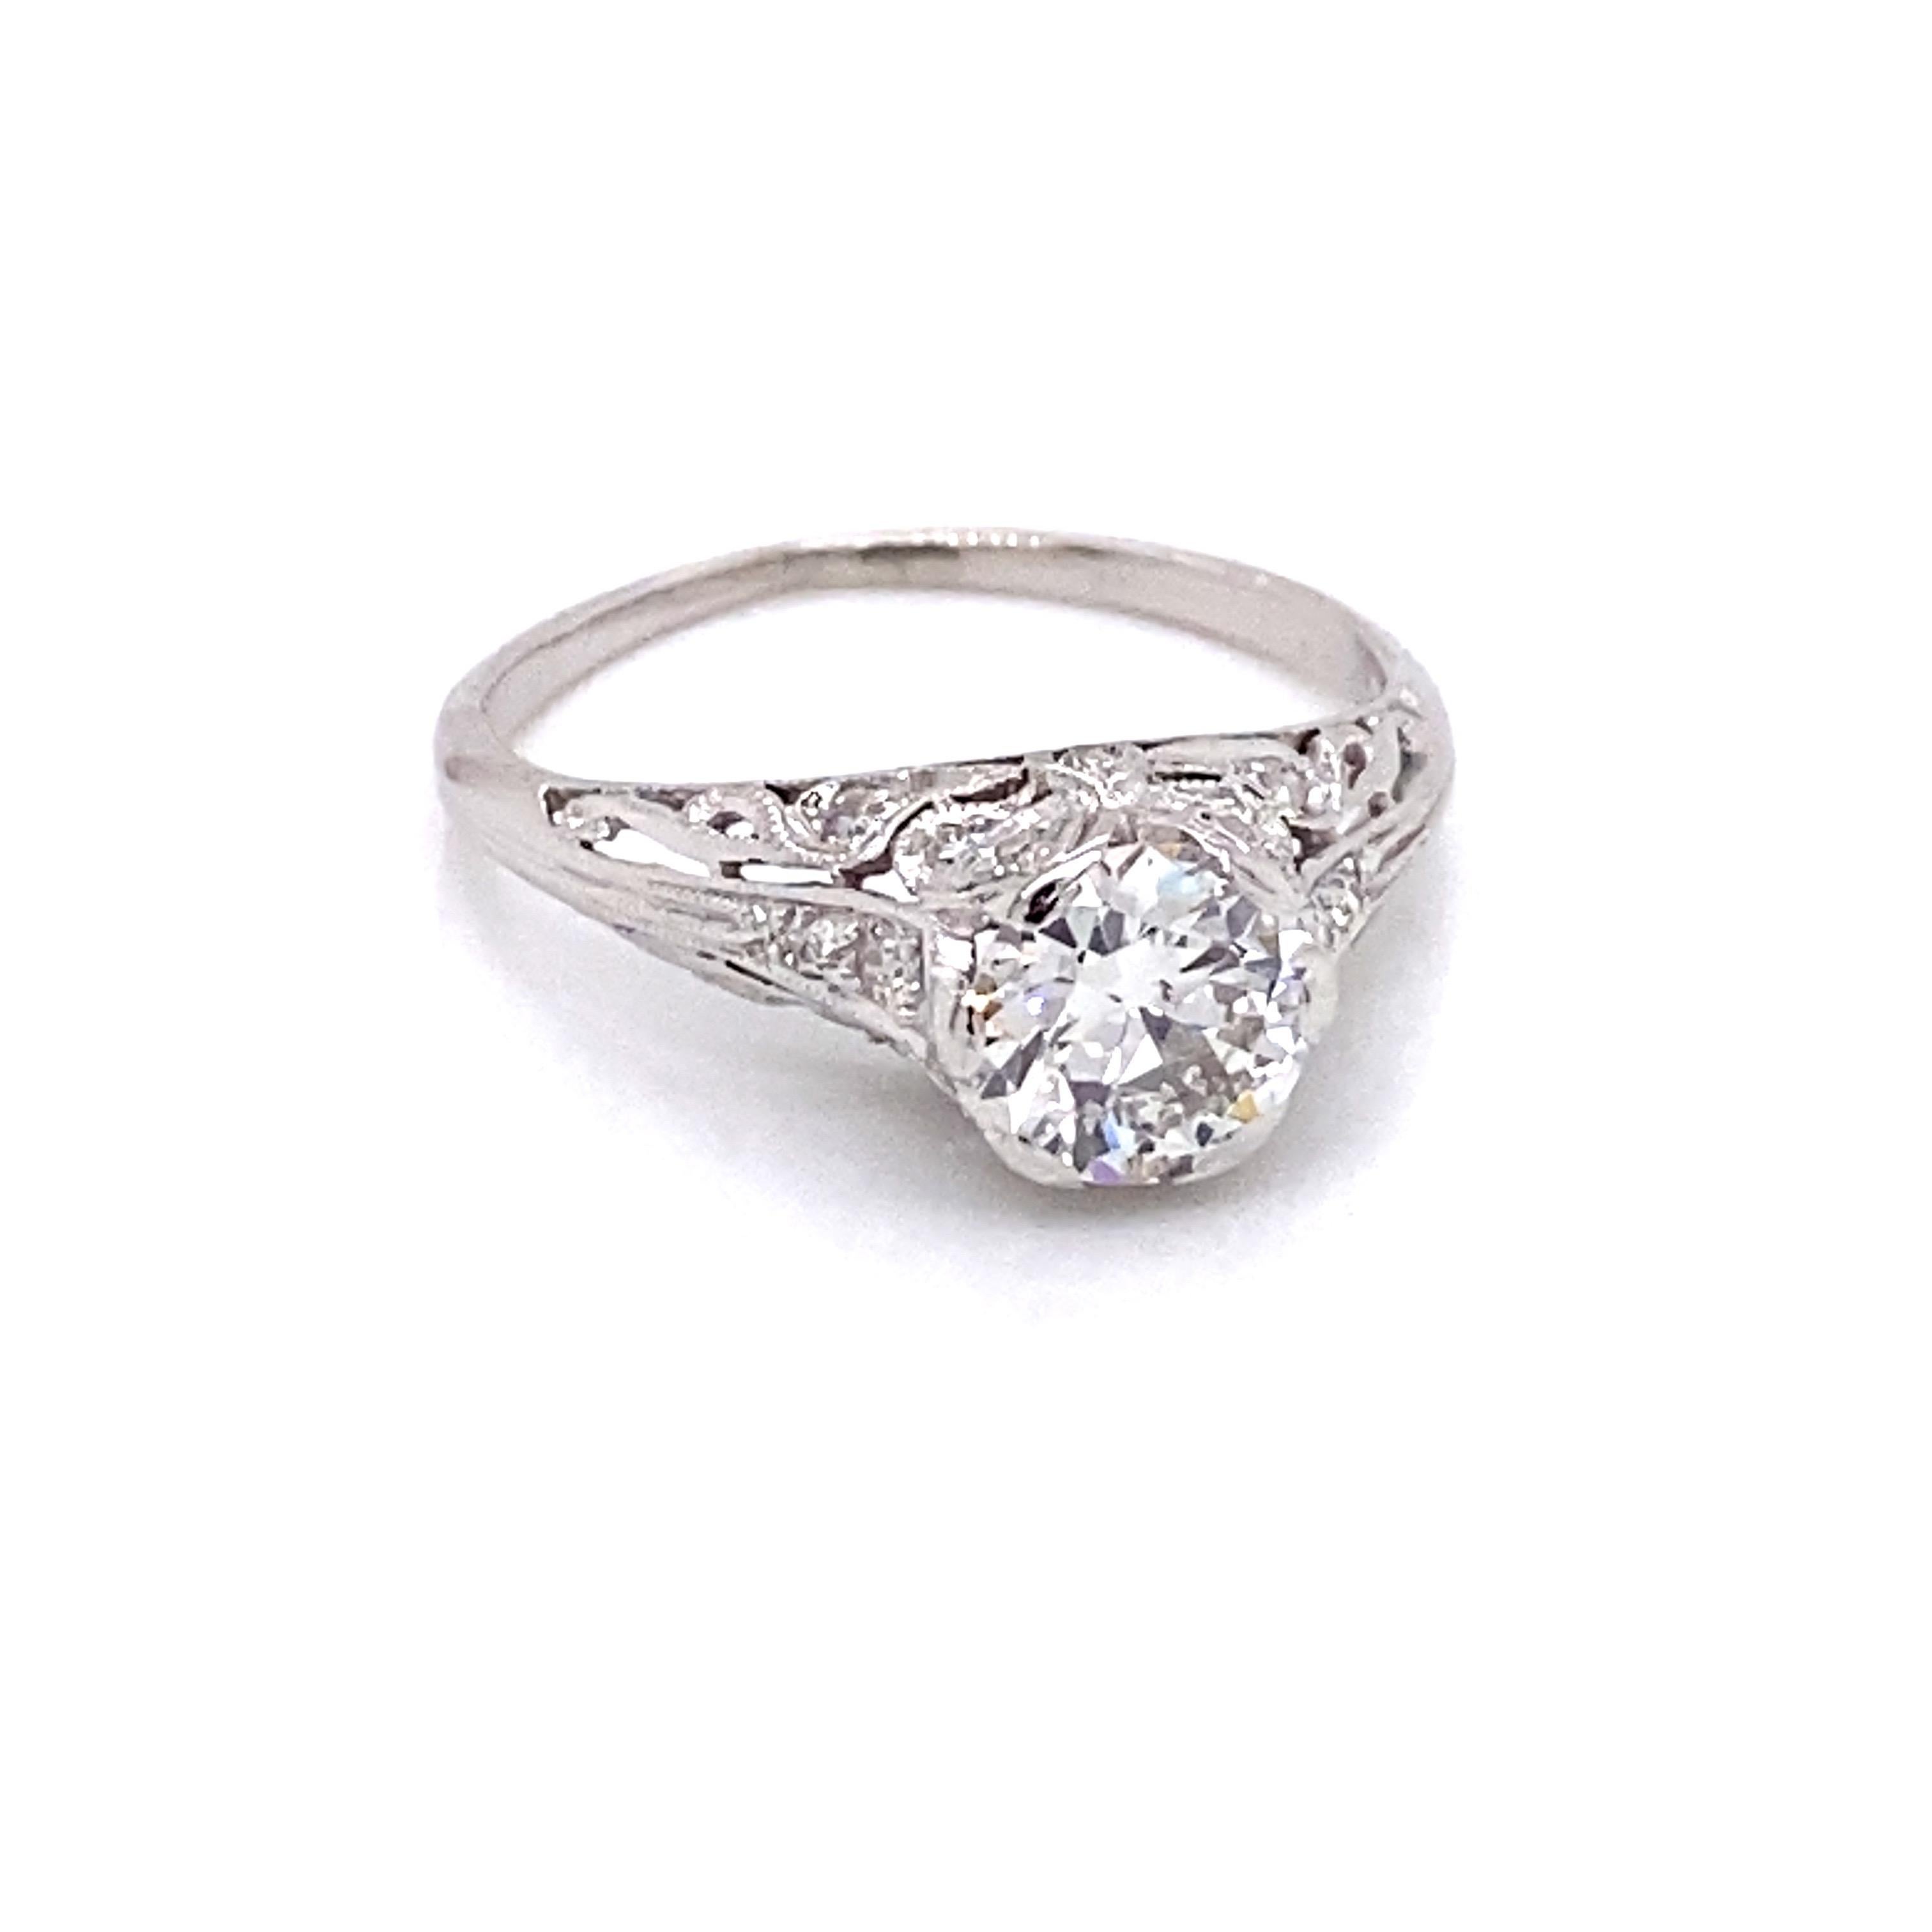 Vintage Platinum Art Deco Diamond Engagement Filigree Ring - The center European cut diamond weighs approximately 1.31ct and has the quality of M color and VS2 clarity. The diamond sits high in a platinum early Art Deco filigree setting that